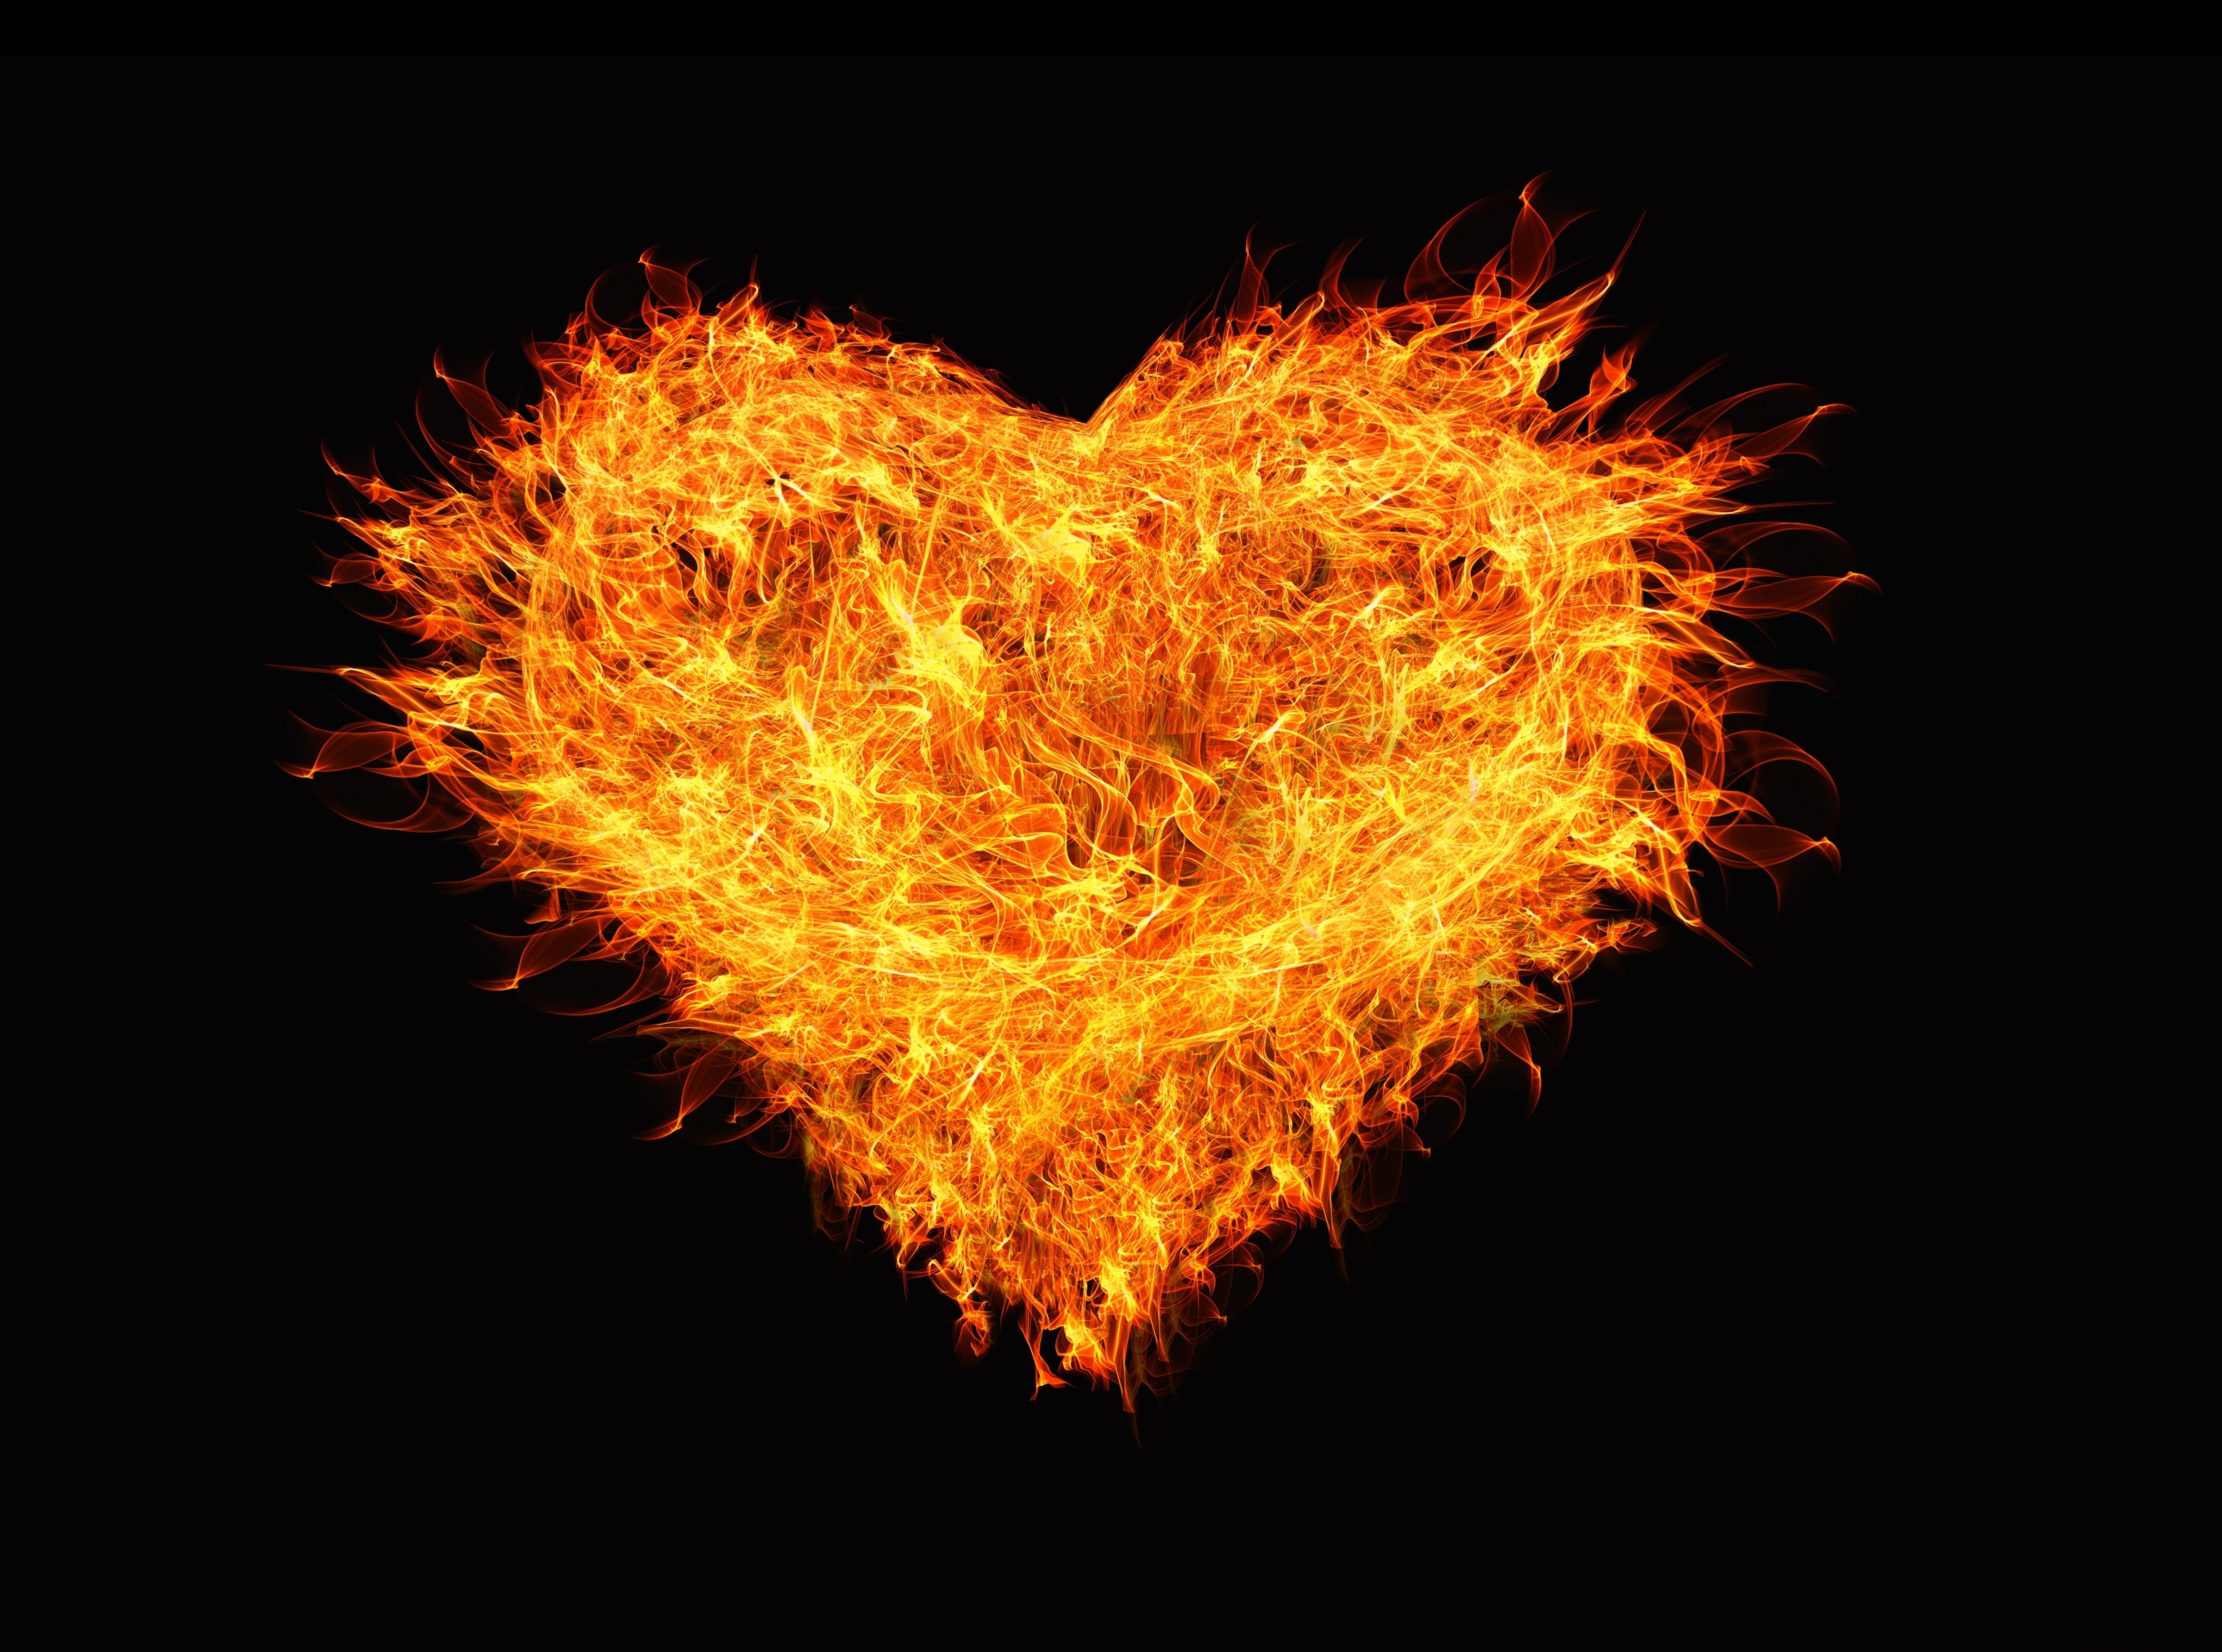 Fire Heart, fire heart illustration, Elements, Love, Passion